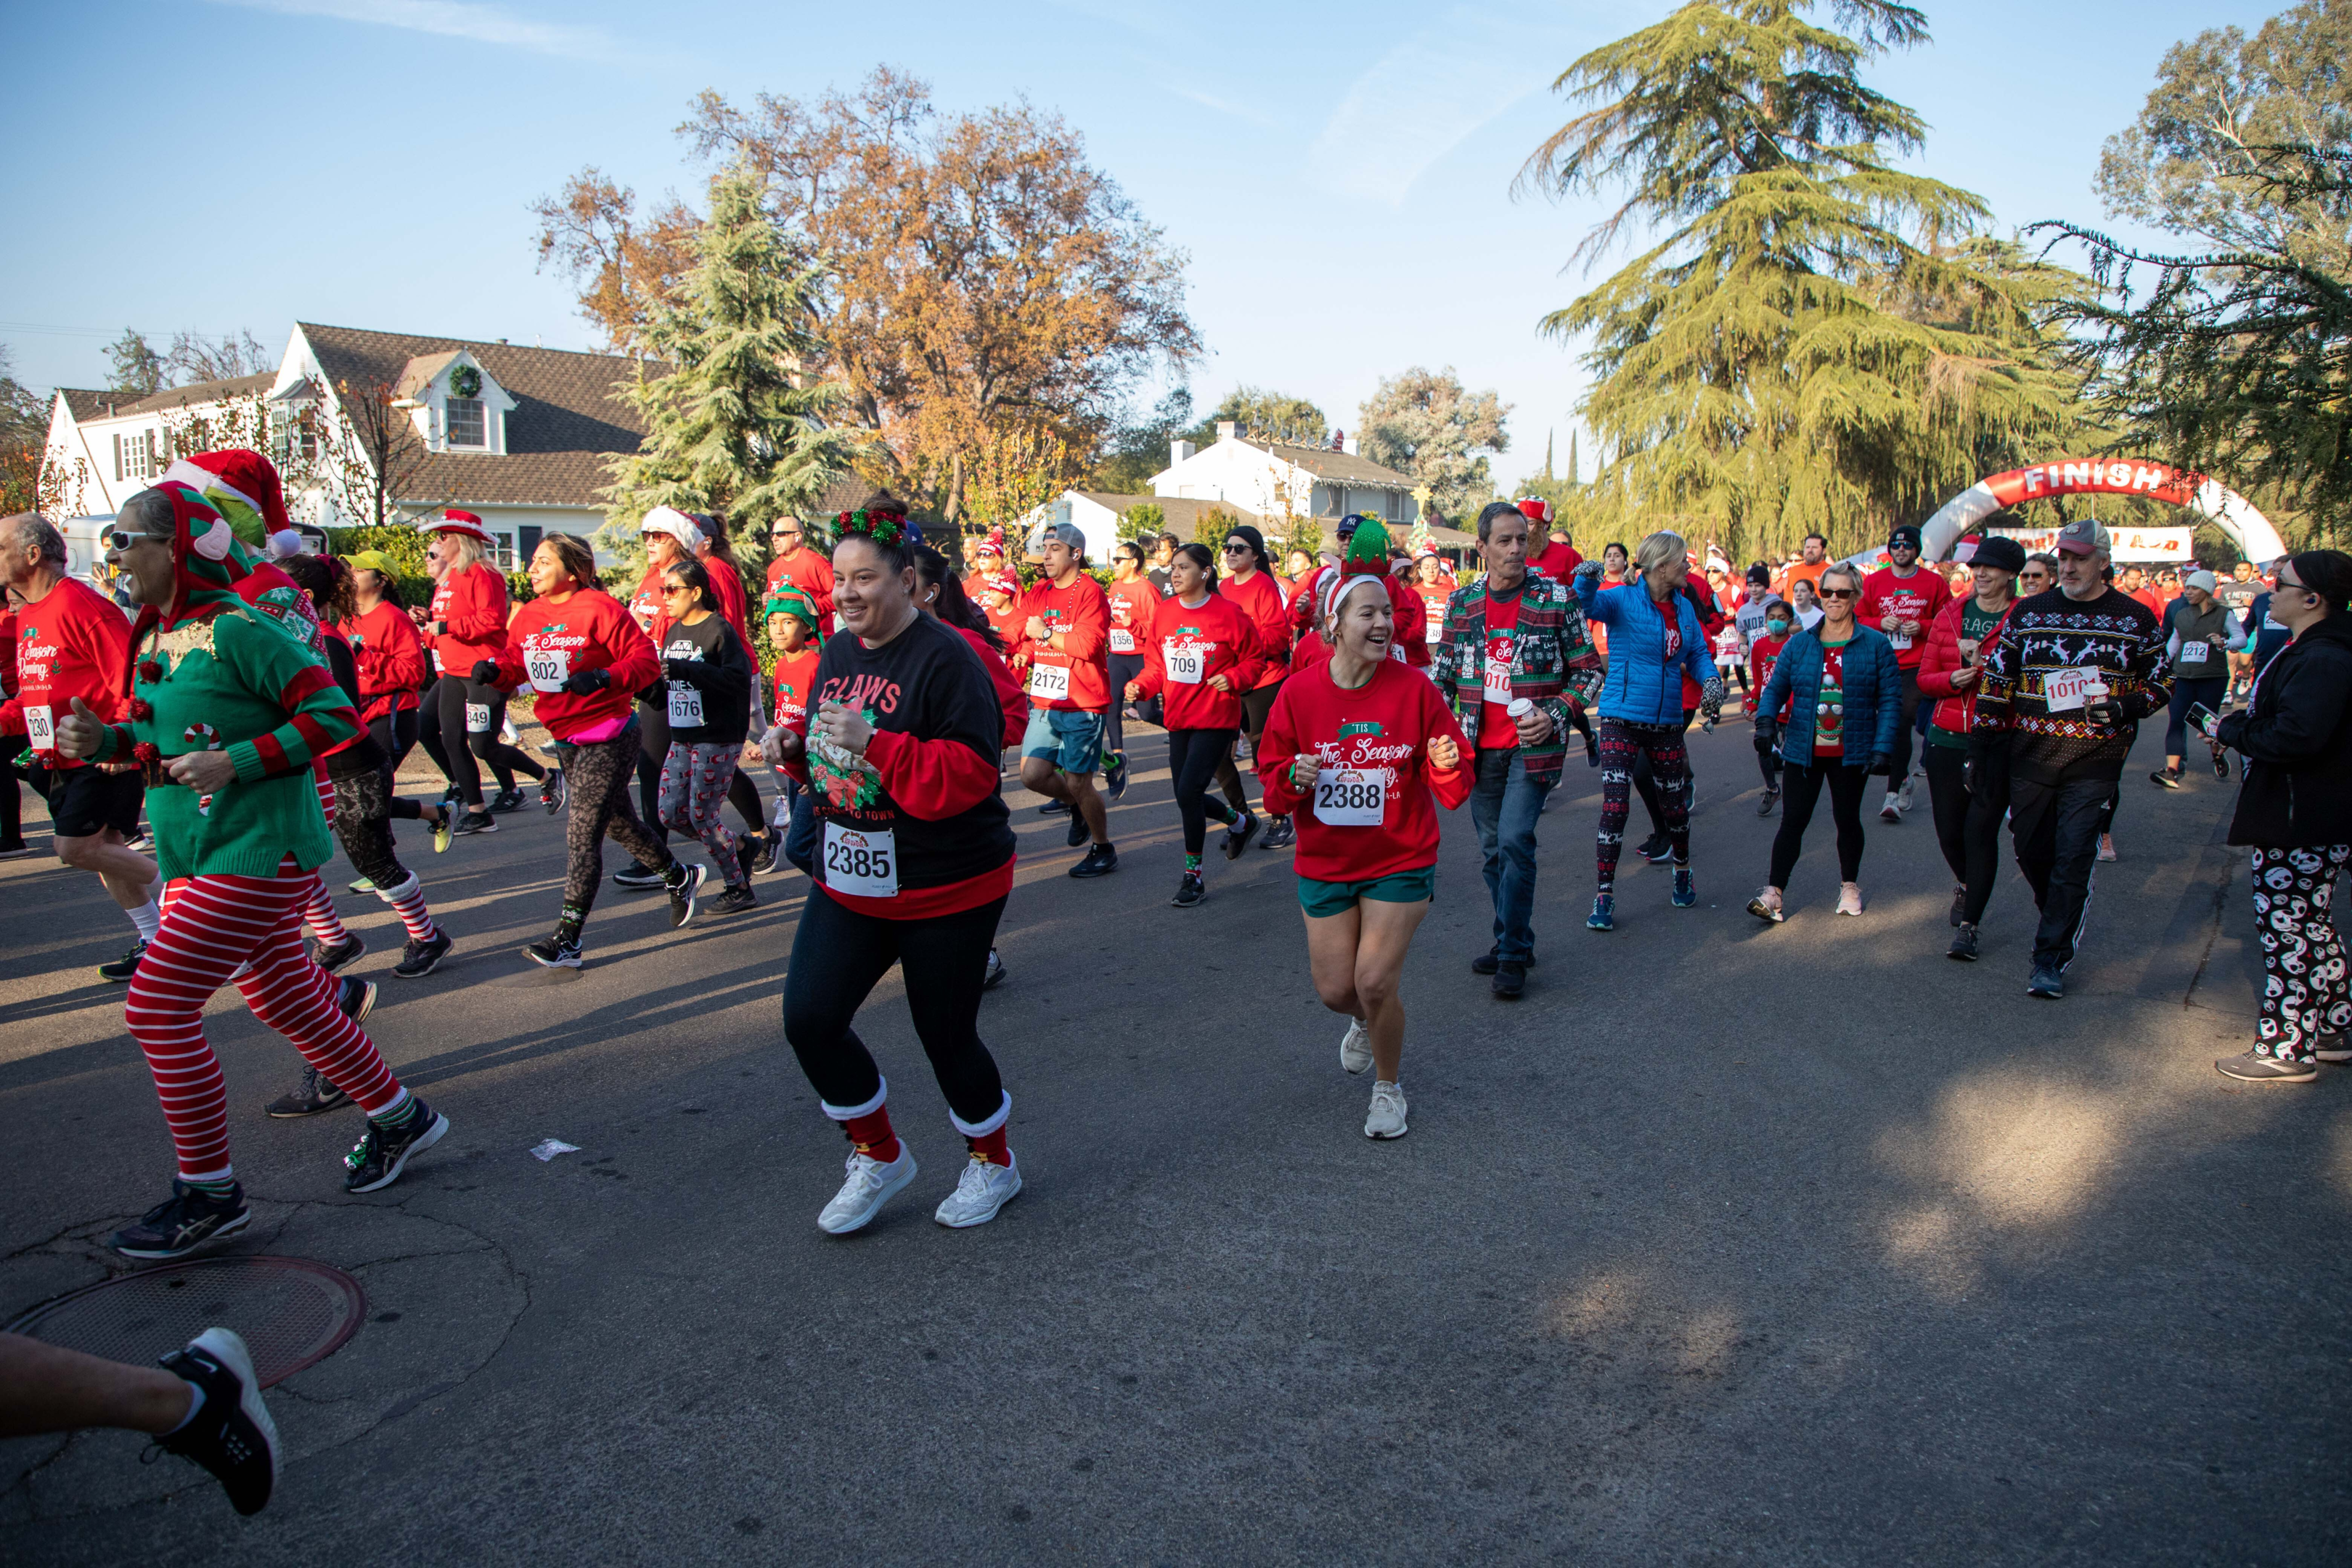 Crowds participating in the Denver Jingle Bell Run 